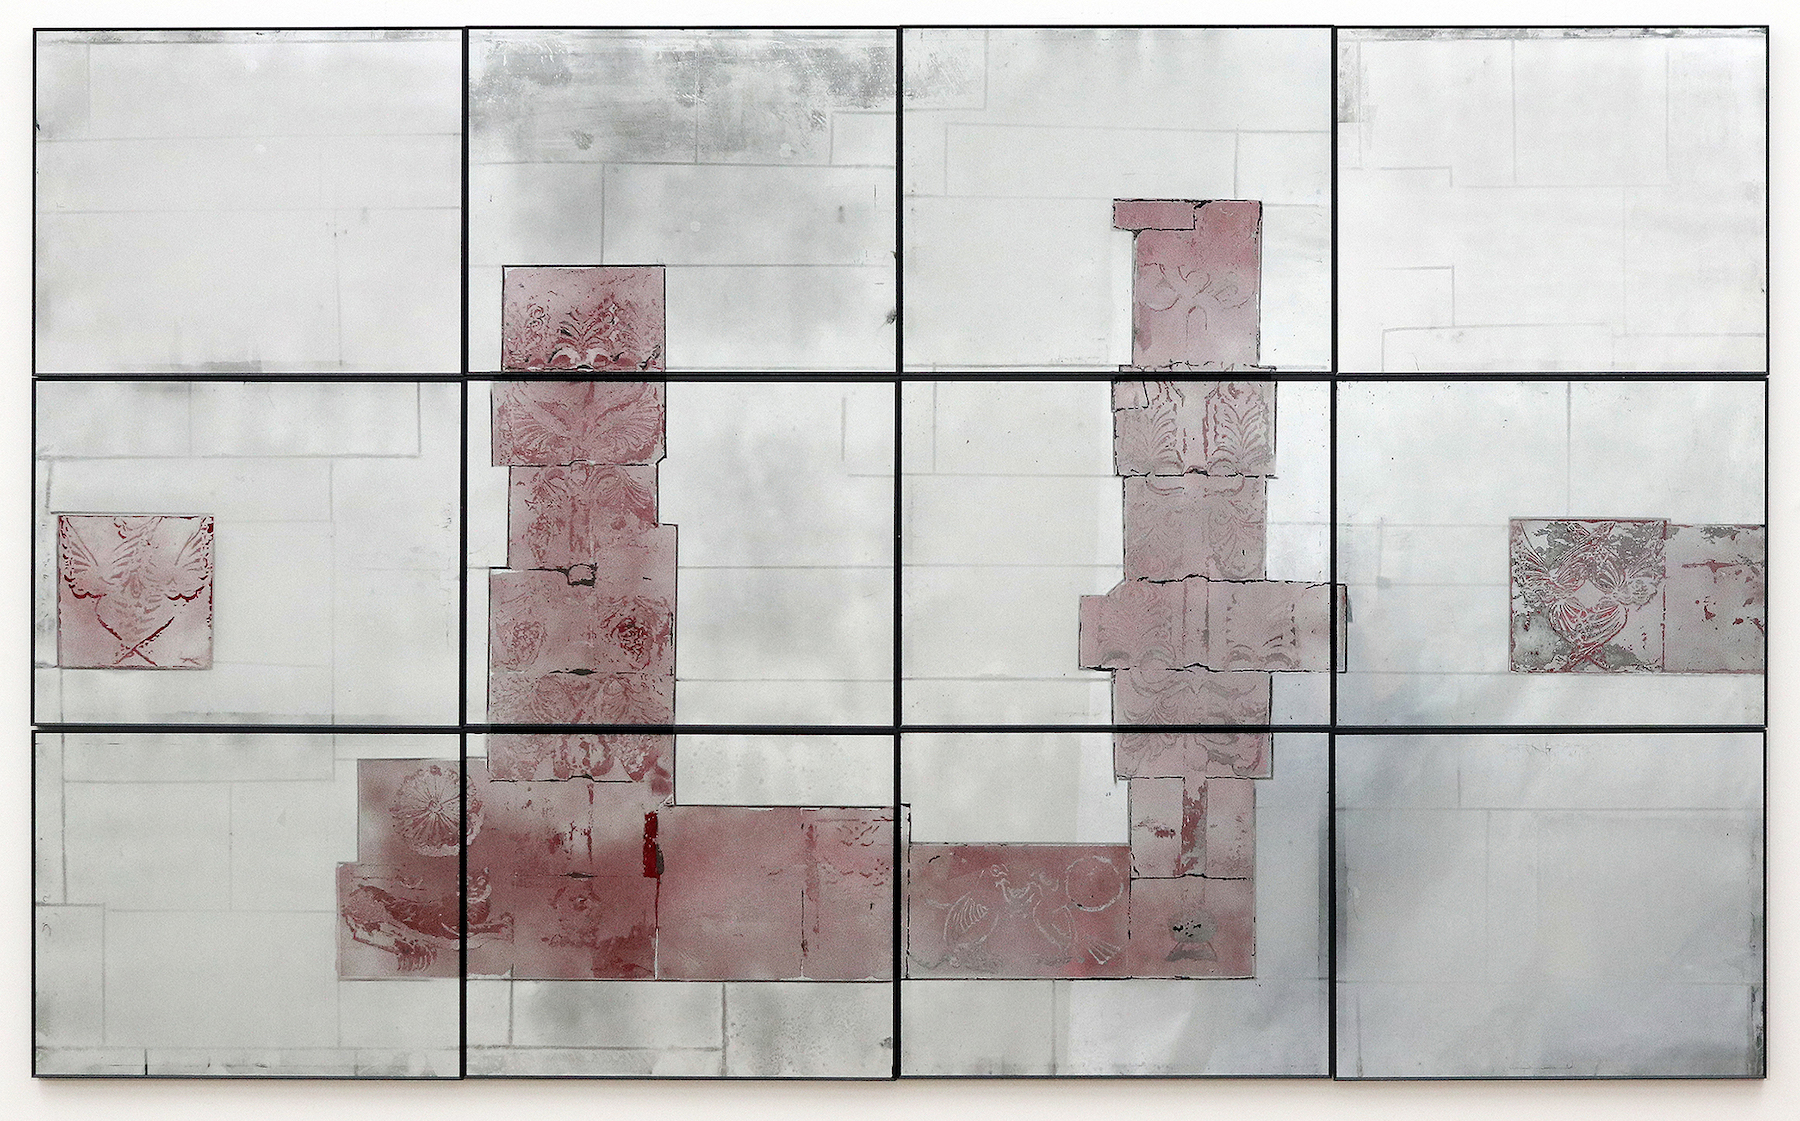 13. Gardens of Eurasia (Gifts of Stones and Earth), 2022, Hand-painted liquid mirror and enamel on glass in aluminum frame, Twelve panels, overall 48.5 x 80.5 inches.
Image courtesy the artist and Marisa Newman Projects, NY.
